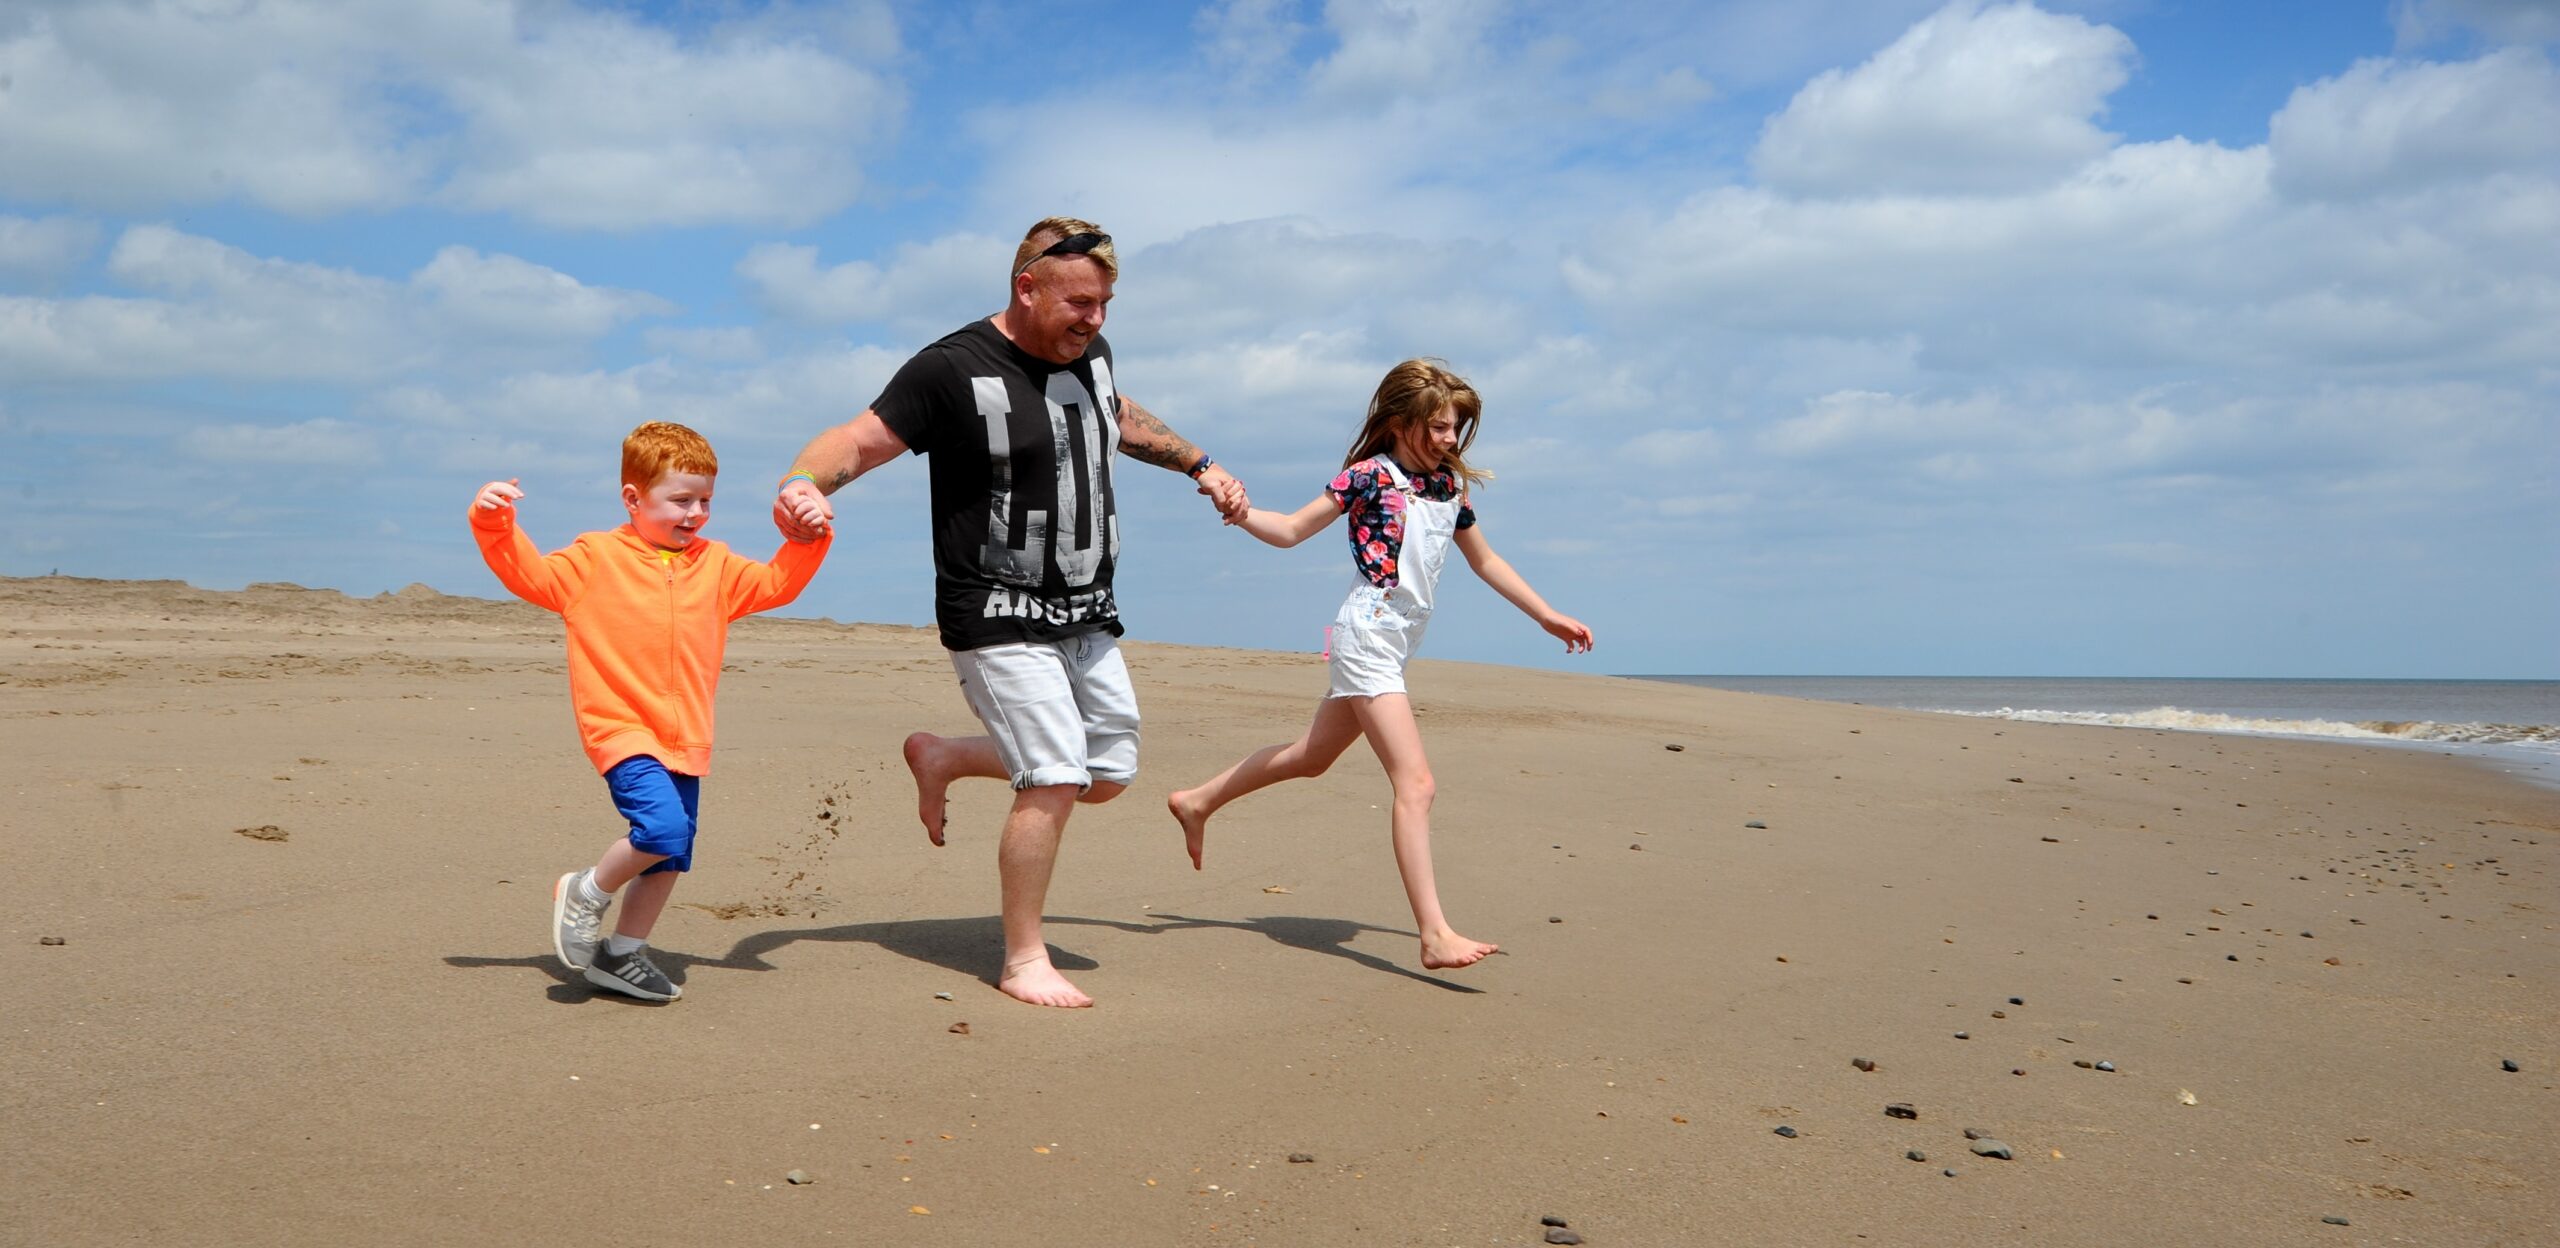 Middle aged man running with young boy and girl on the beach